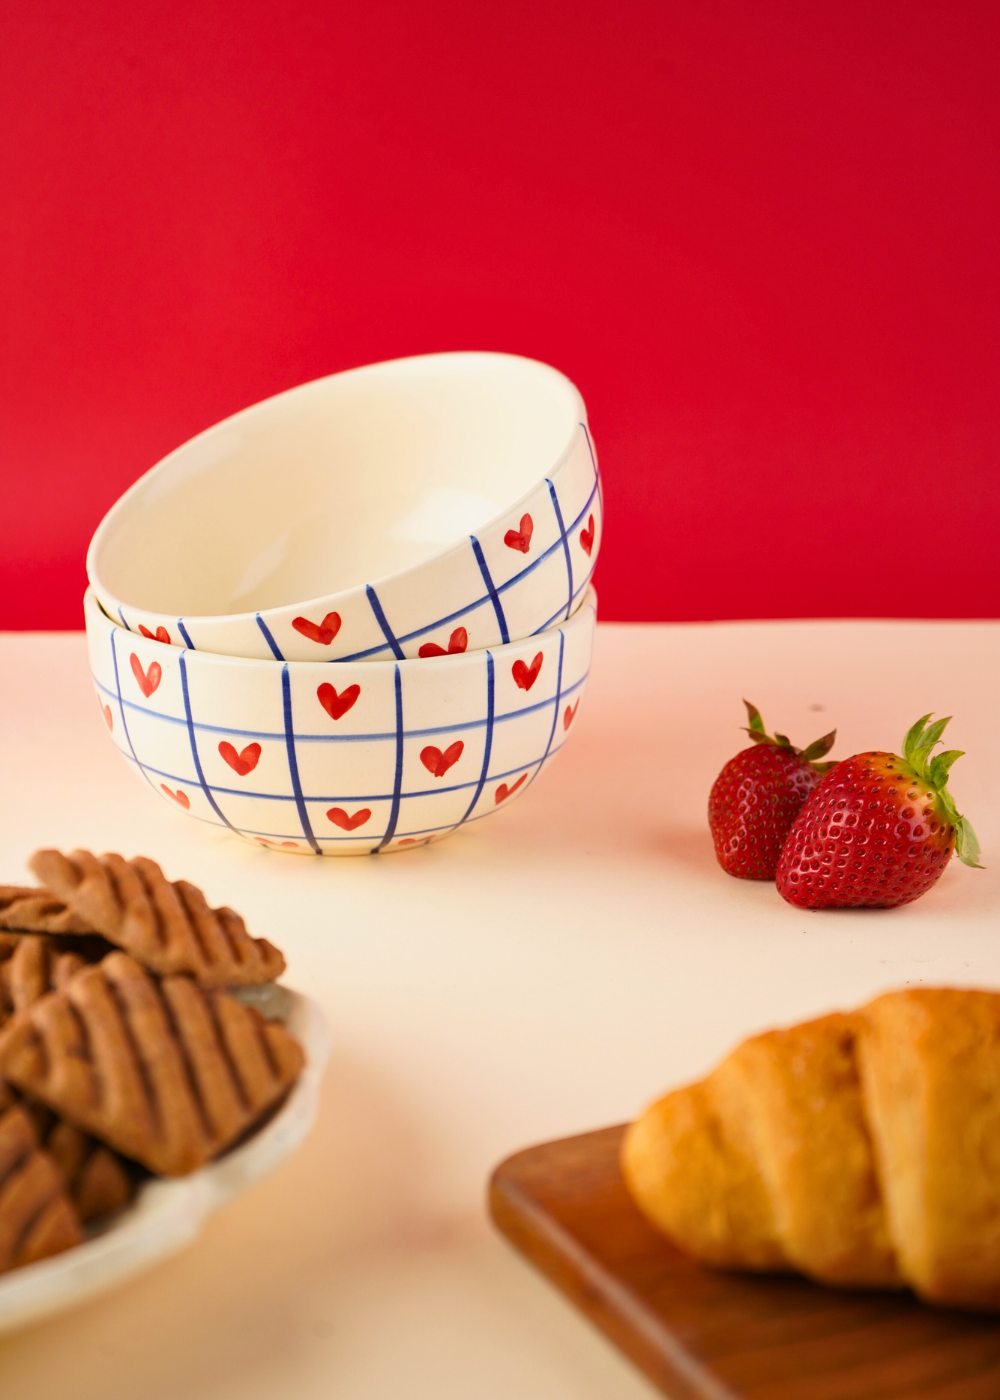 red heart in blue chequered heart bowl 